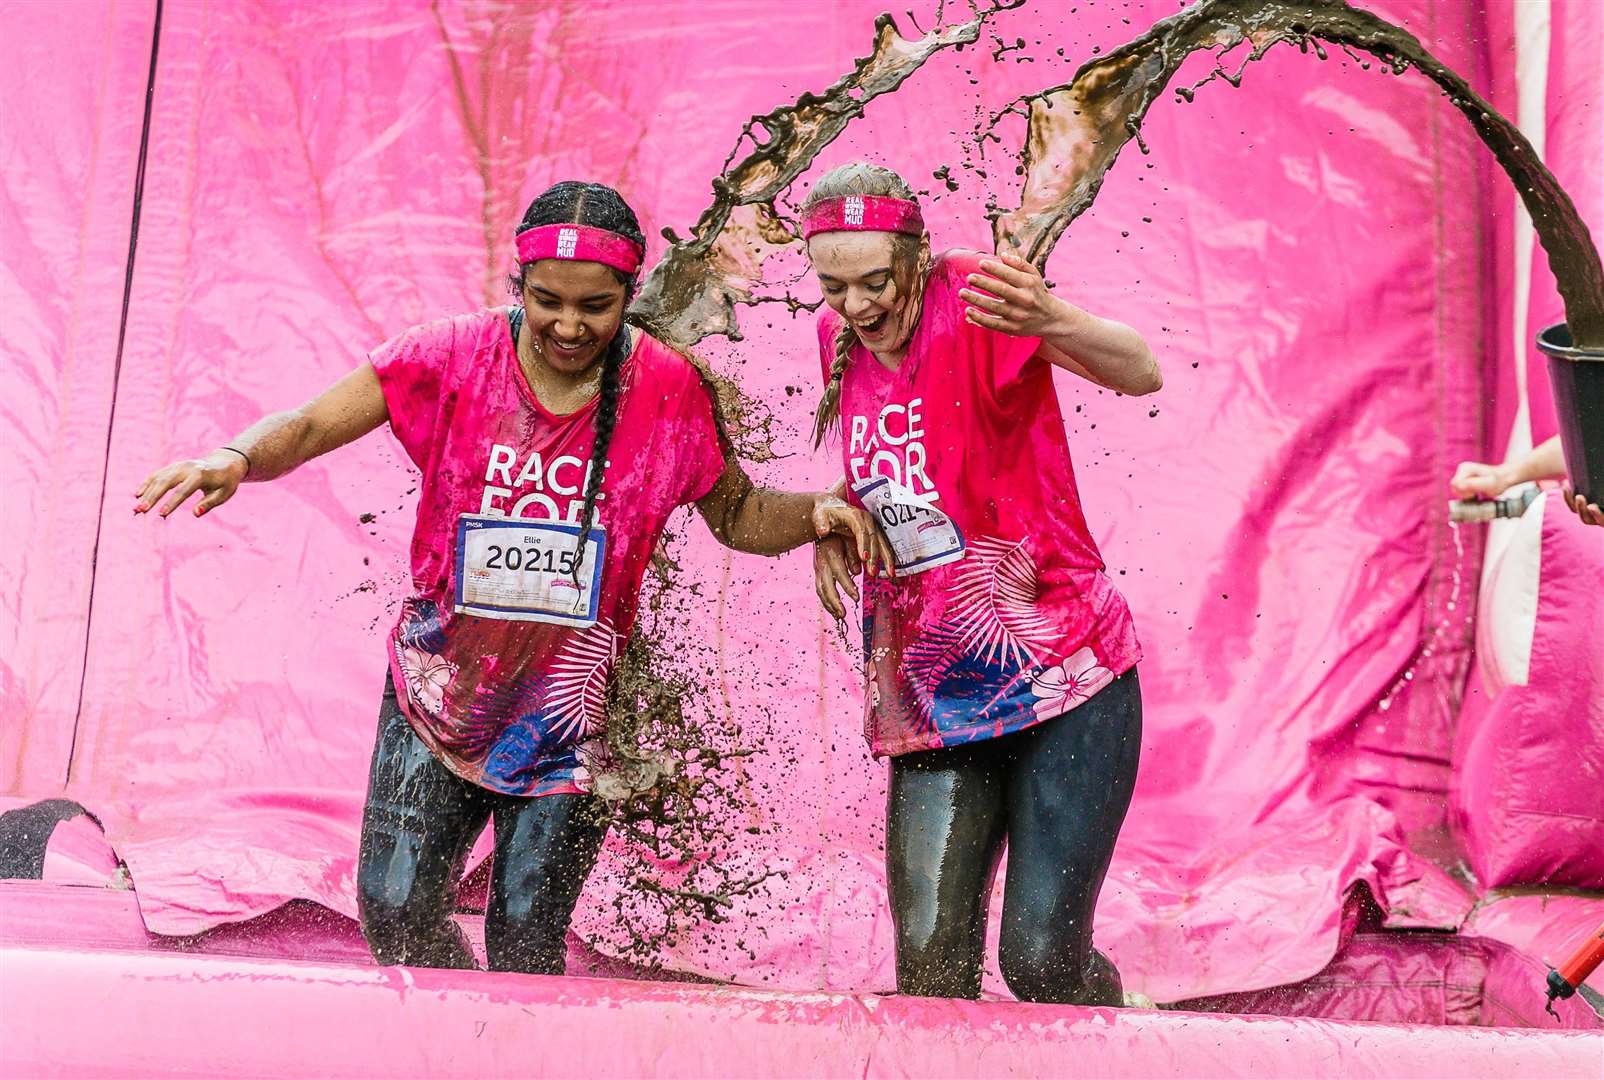 Participants can also take part in 'Pretty Muddy', a mud-splattered obstacle course